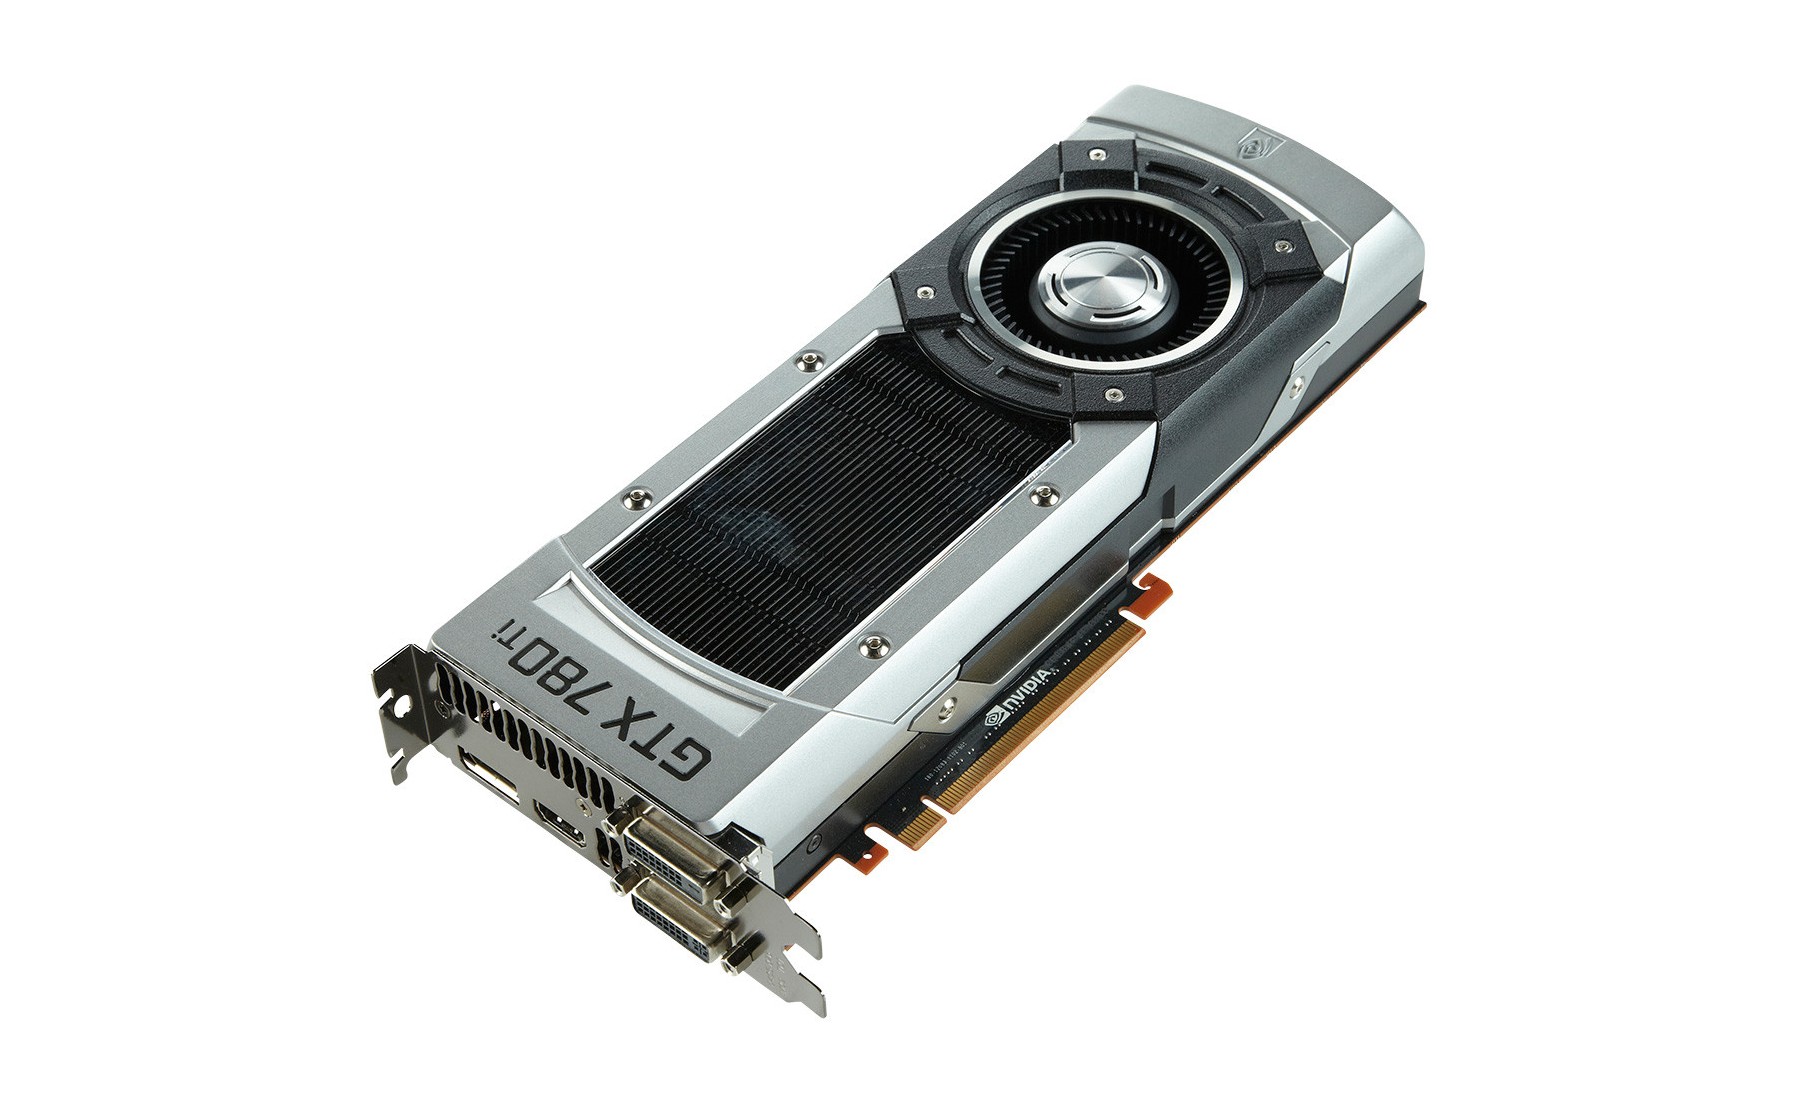 SAs most powerful and expensive graphics cards